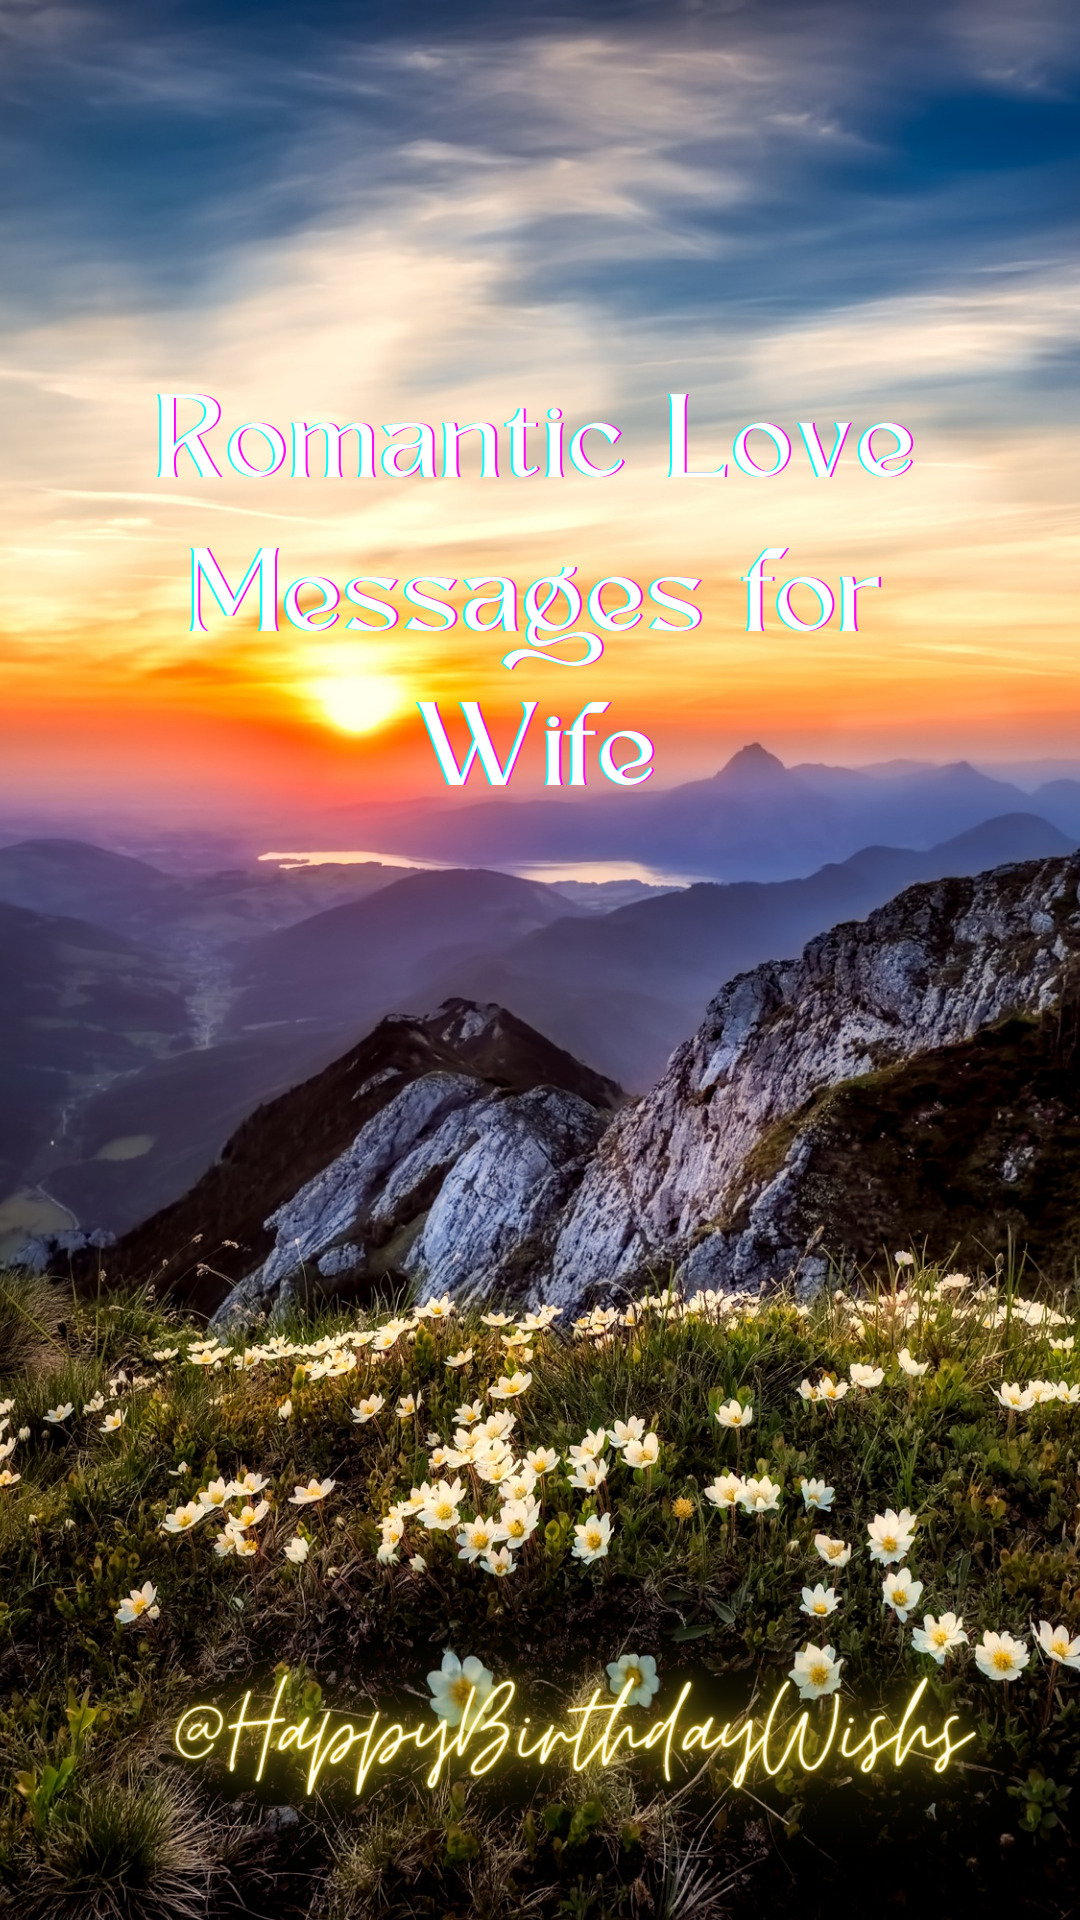 Love messages for wife